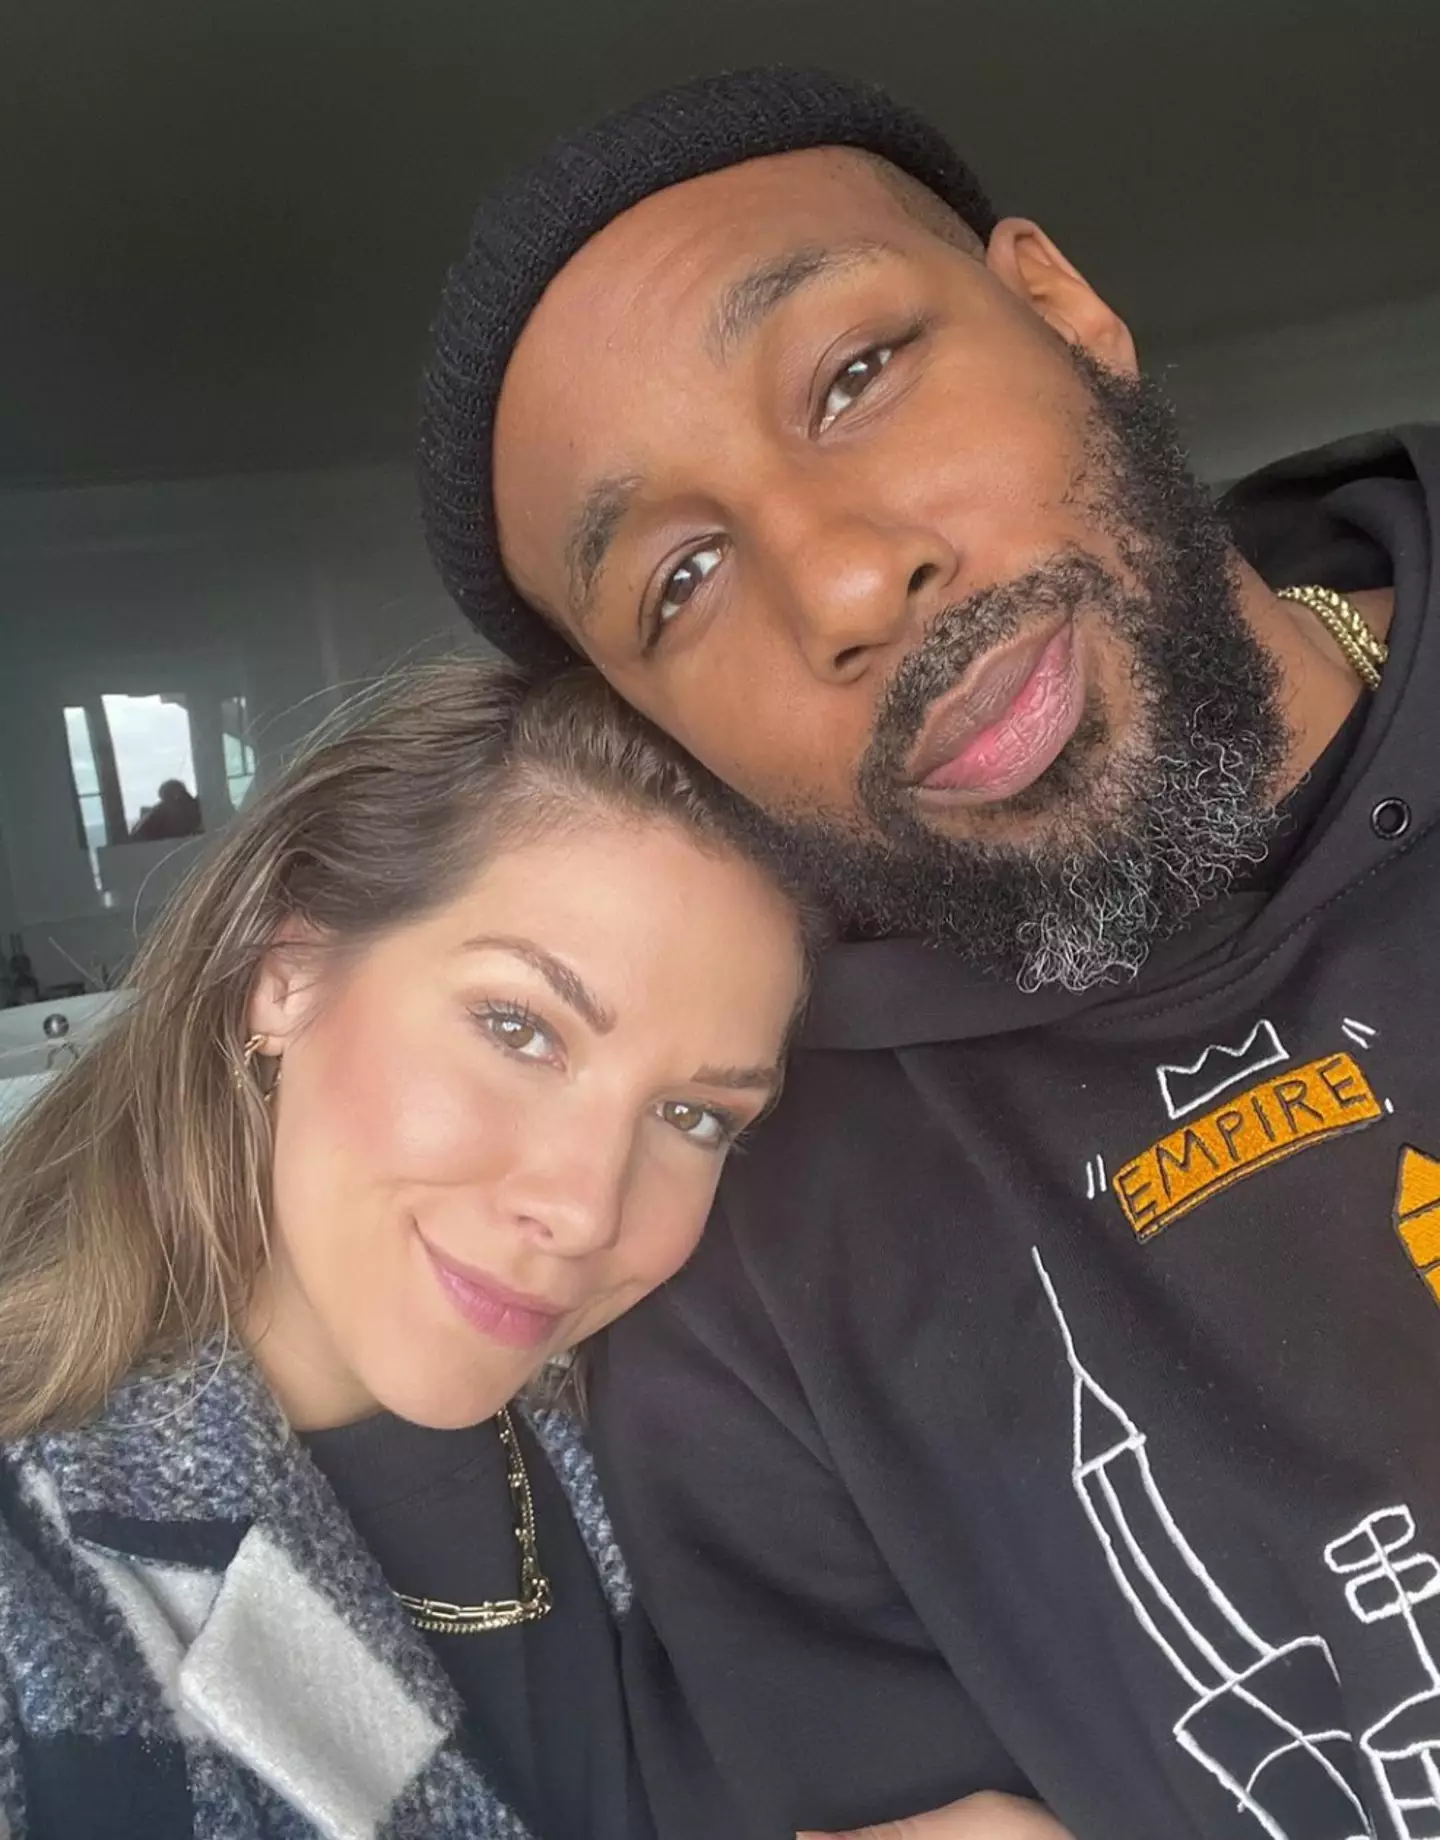 Allison Holker will receive half of Stephen 'tWitch boss' estate after he died without writing a will.